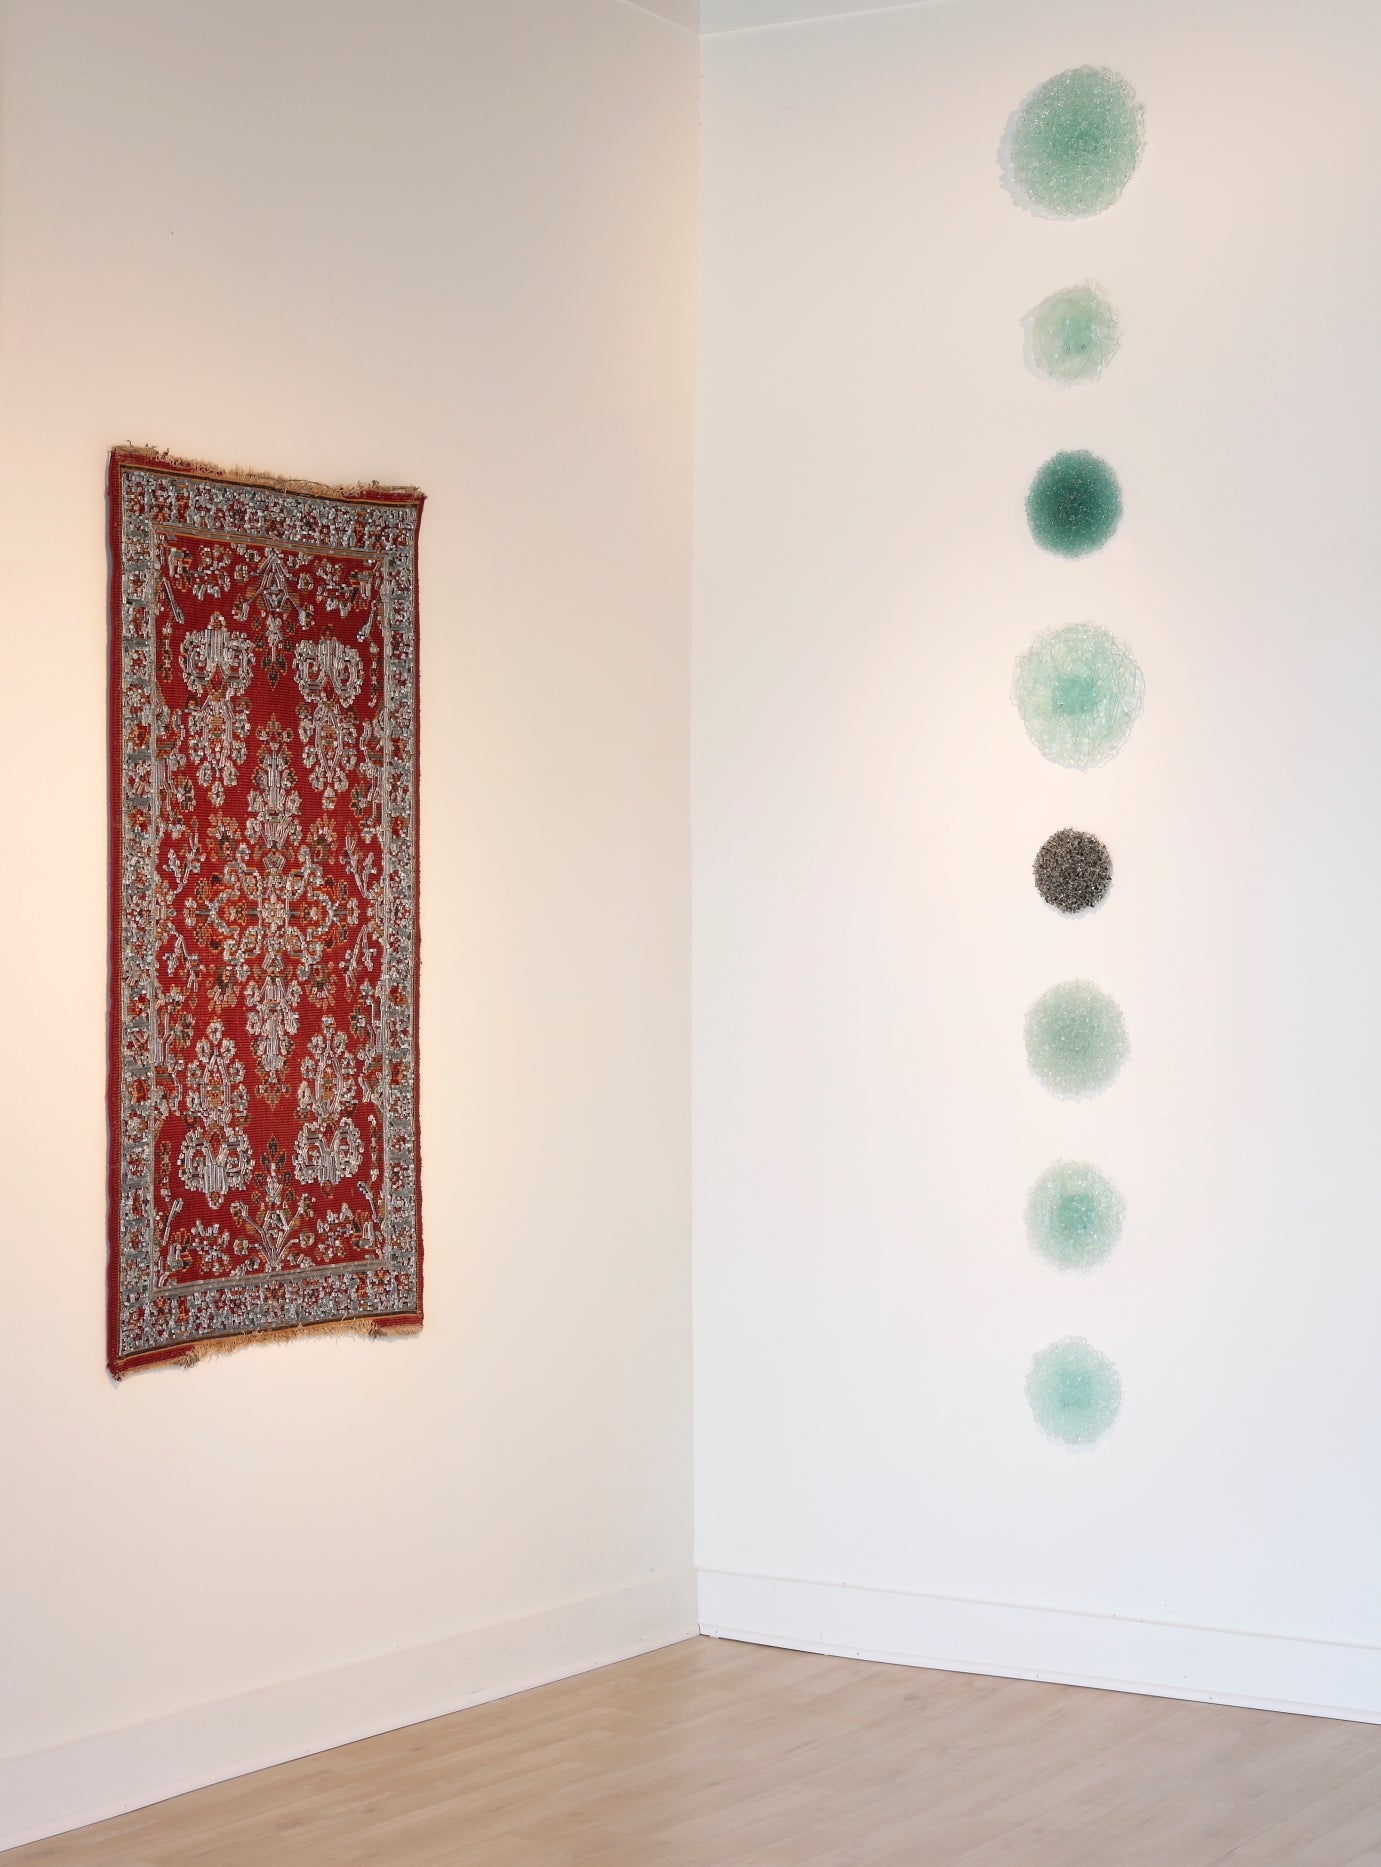 "Experimental Kilnforming with Recycled Glass" with Morgan Gilbreath